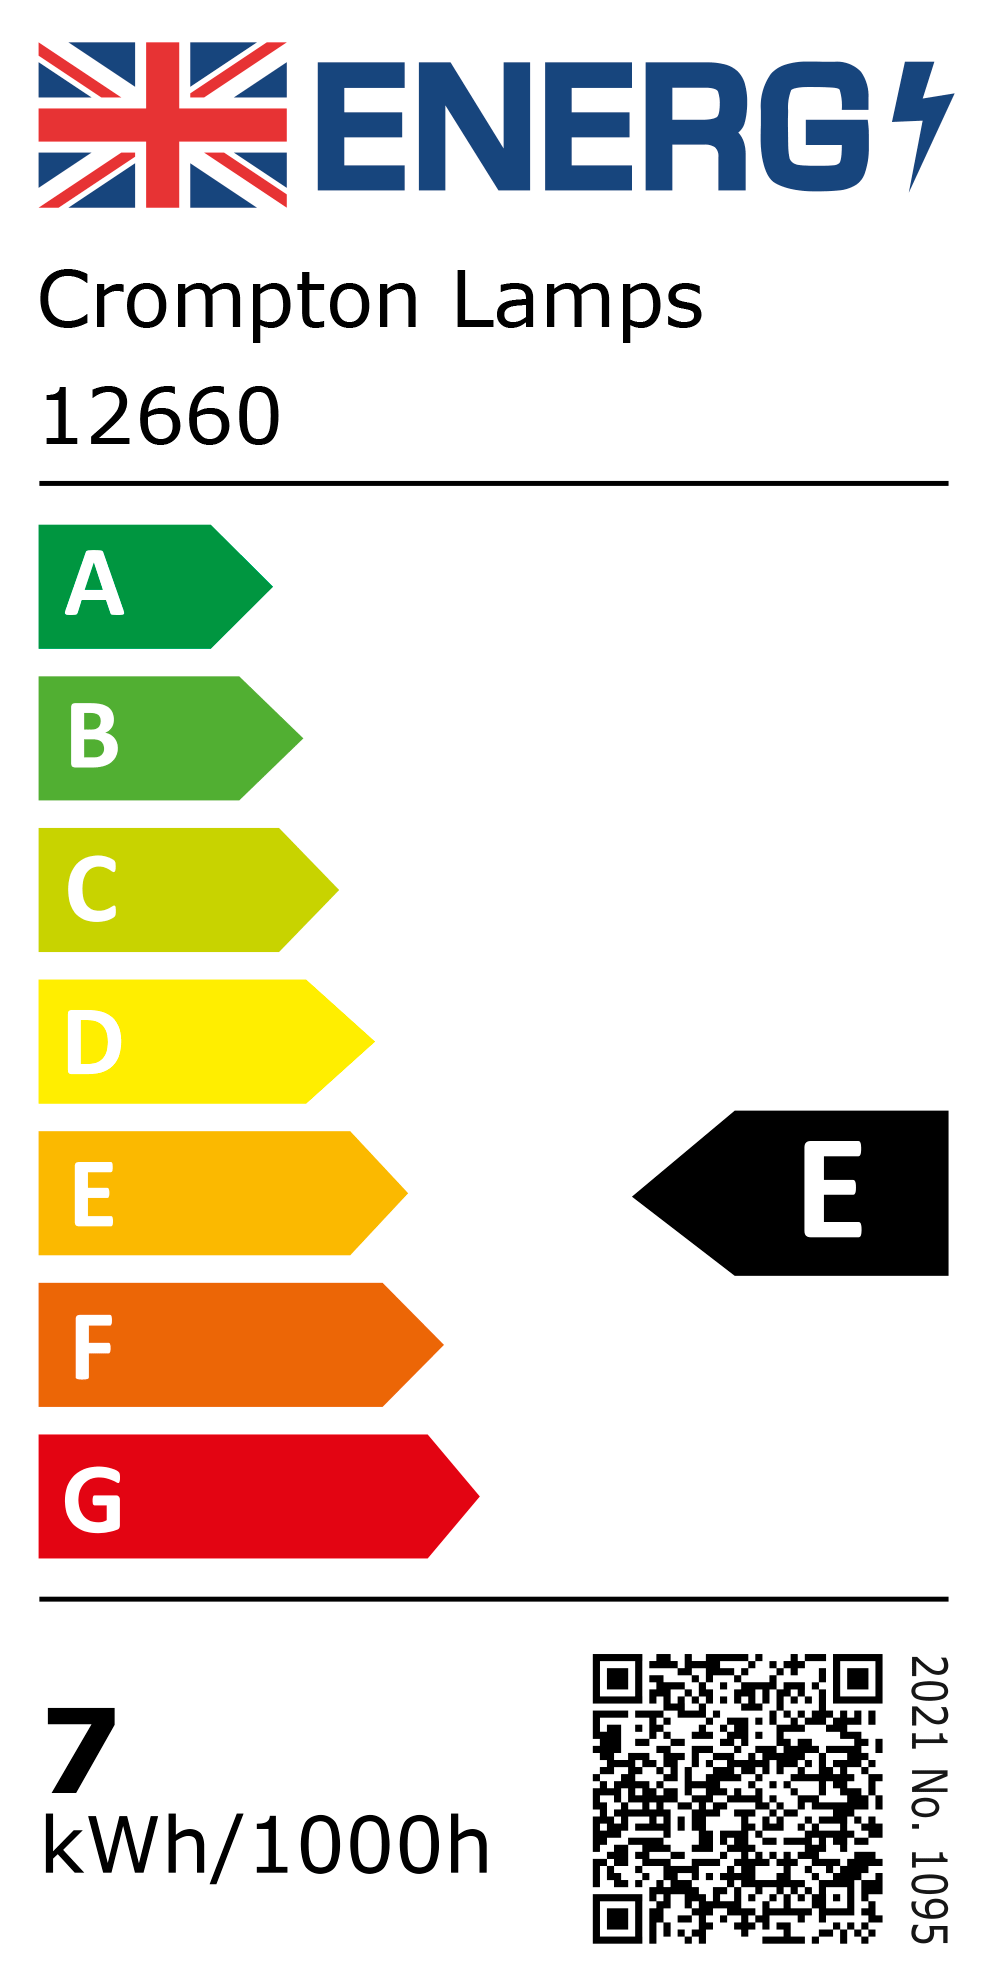 New 2021 Energy Rating Label: Stock Code 12660